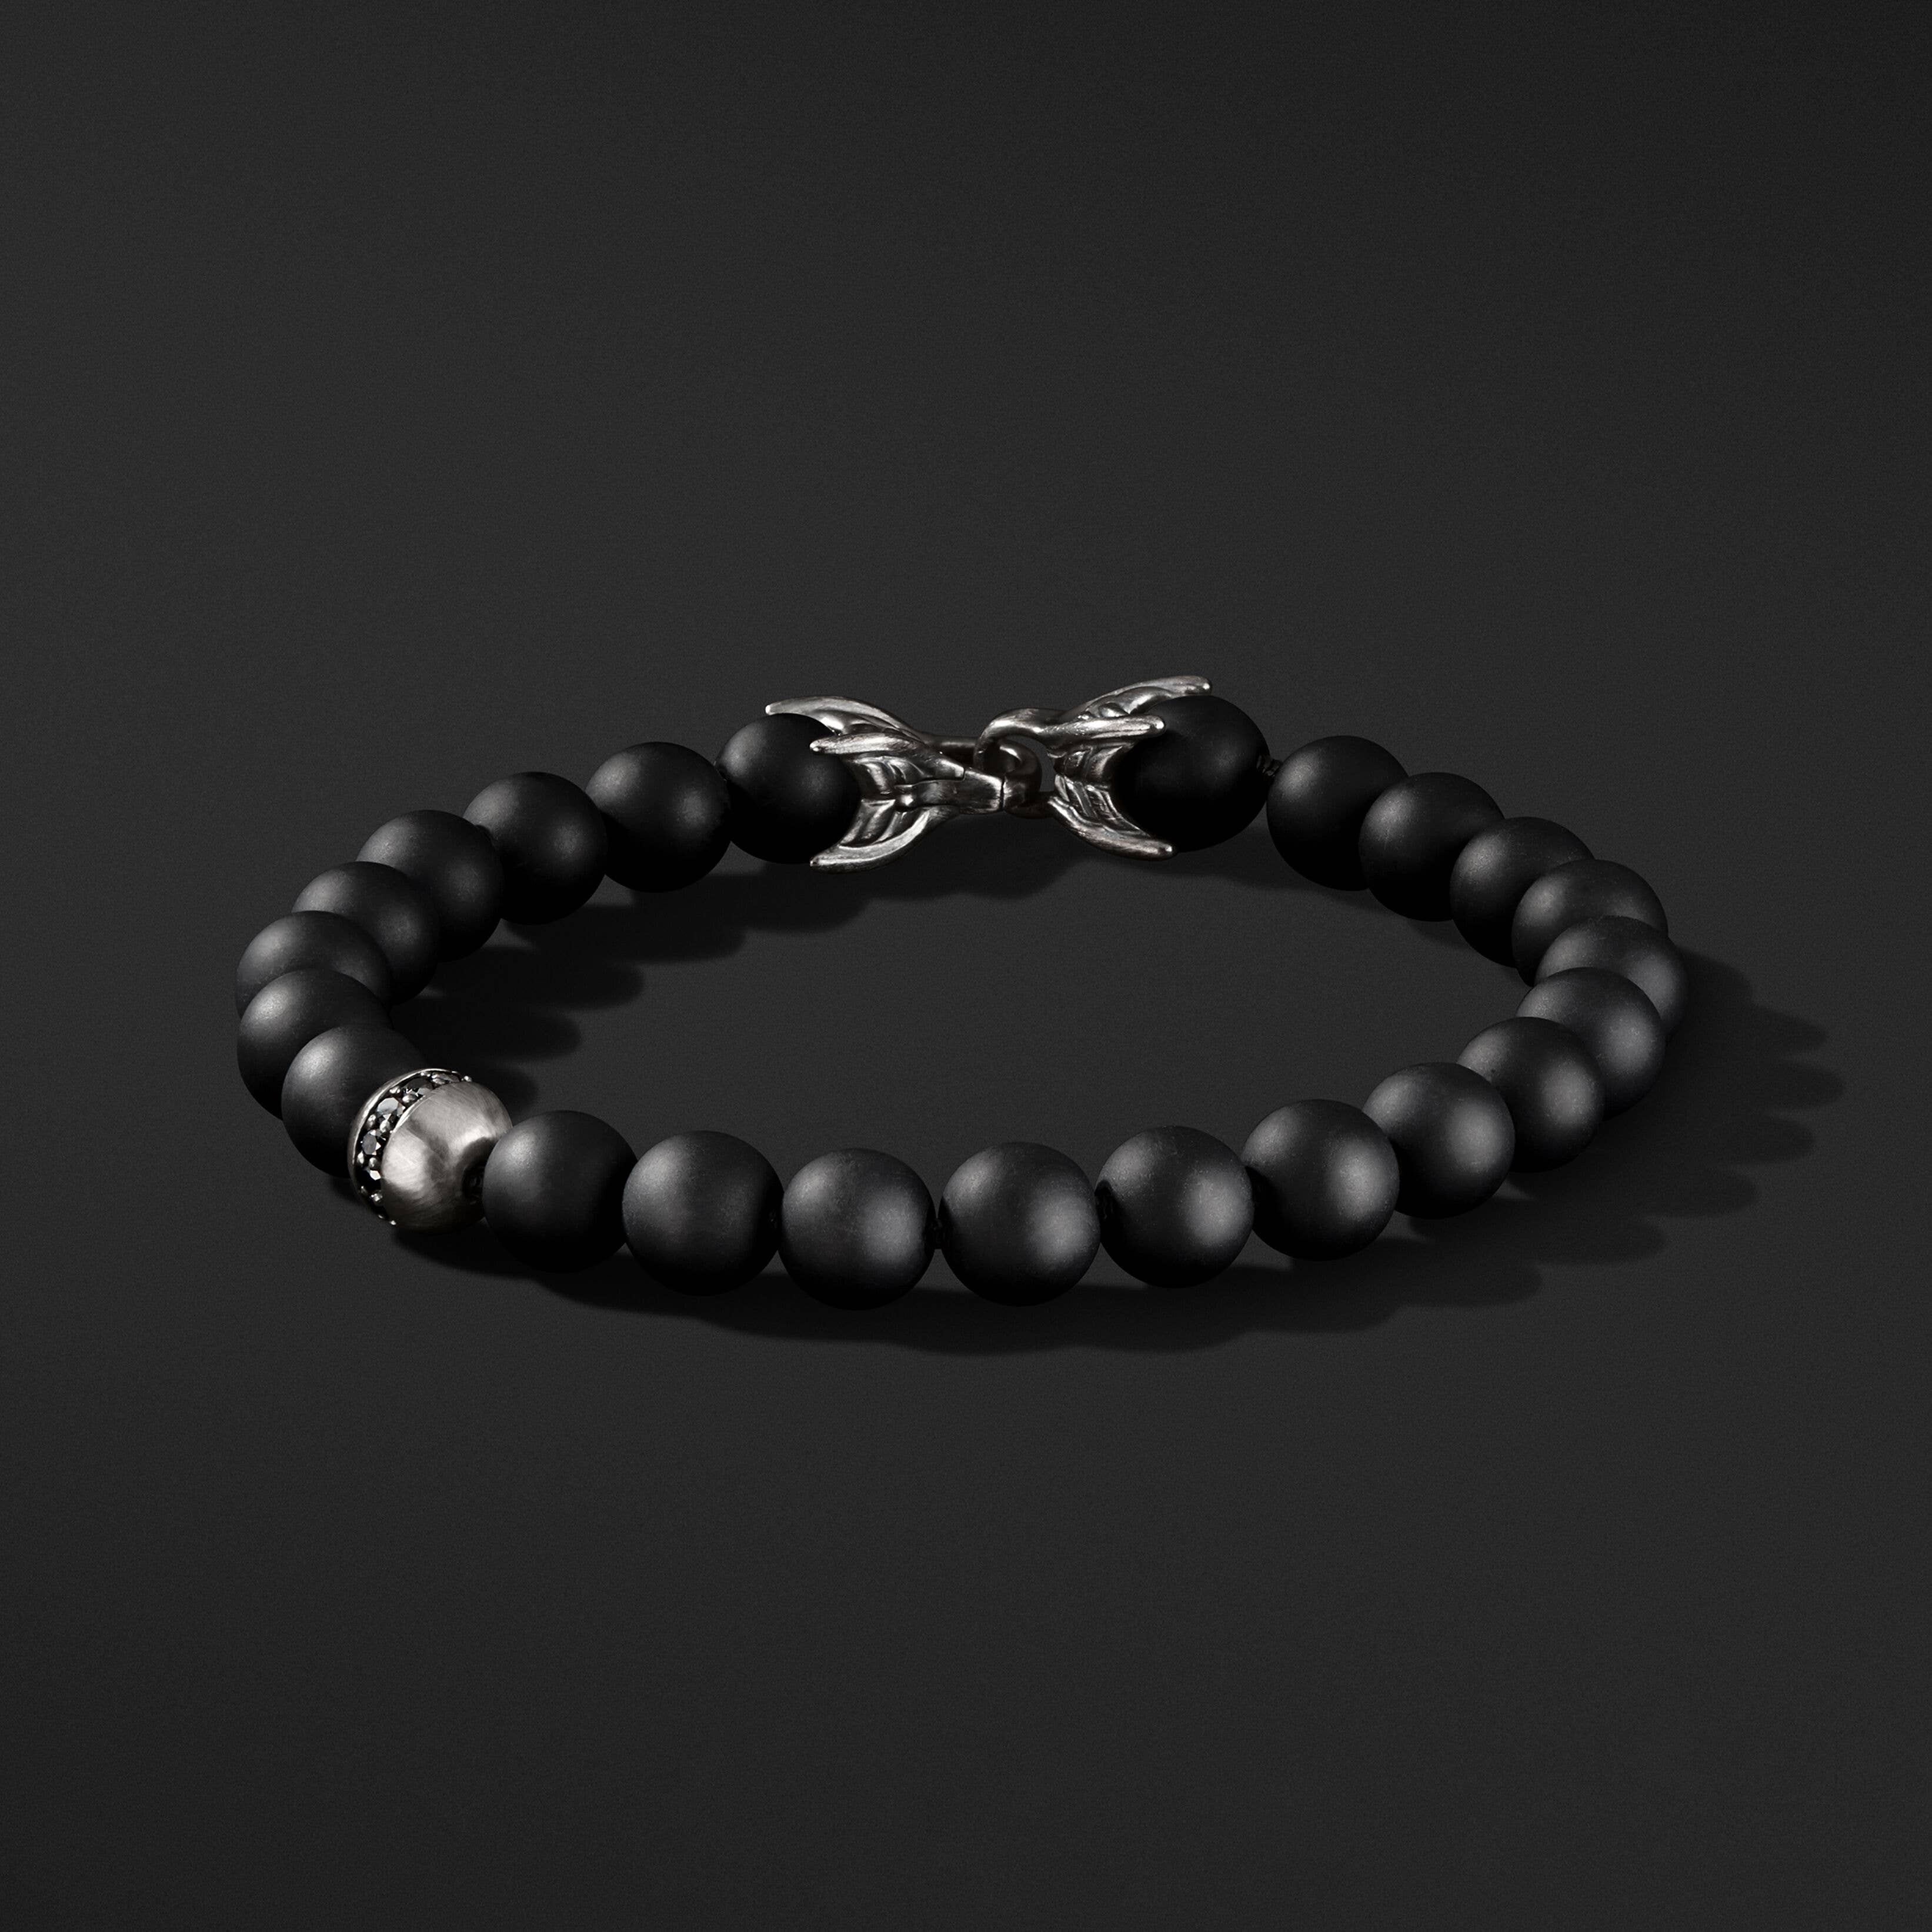 Spiritual Beads Bracelet in Sterling Silver with Black Onyx and Pavé Black Diamond Accent